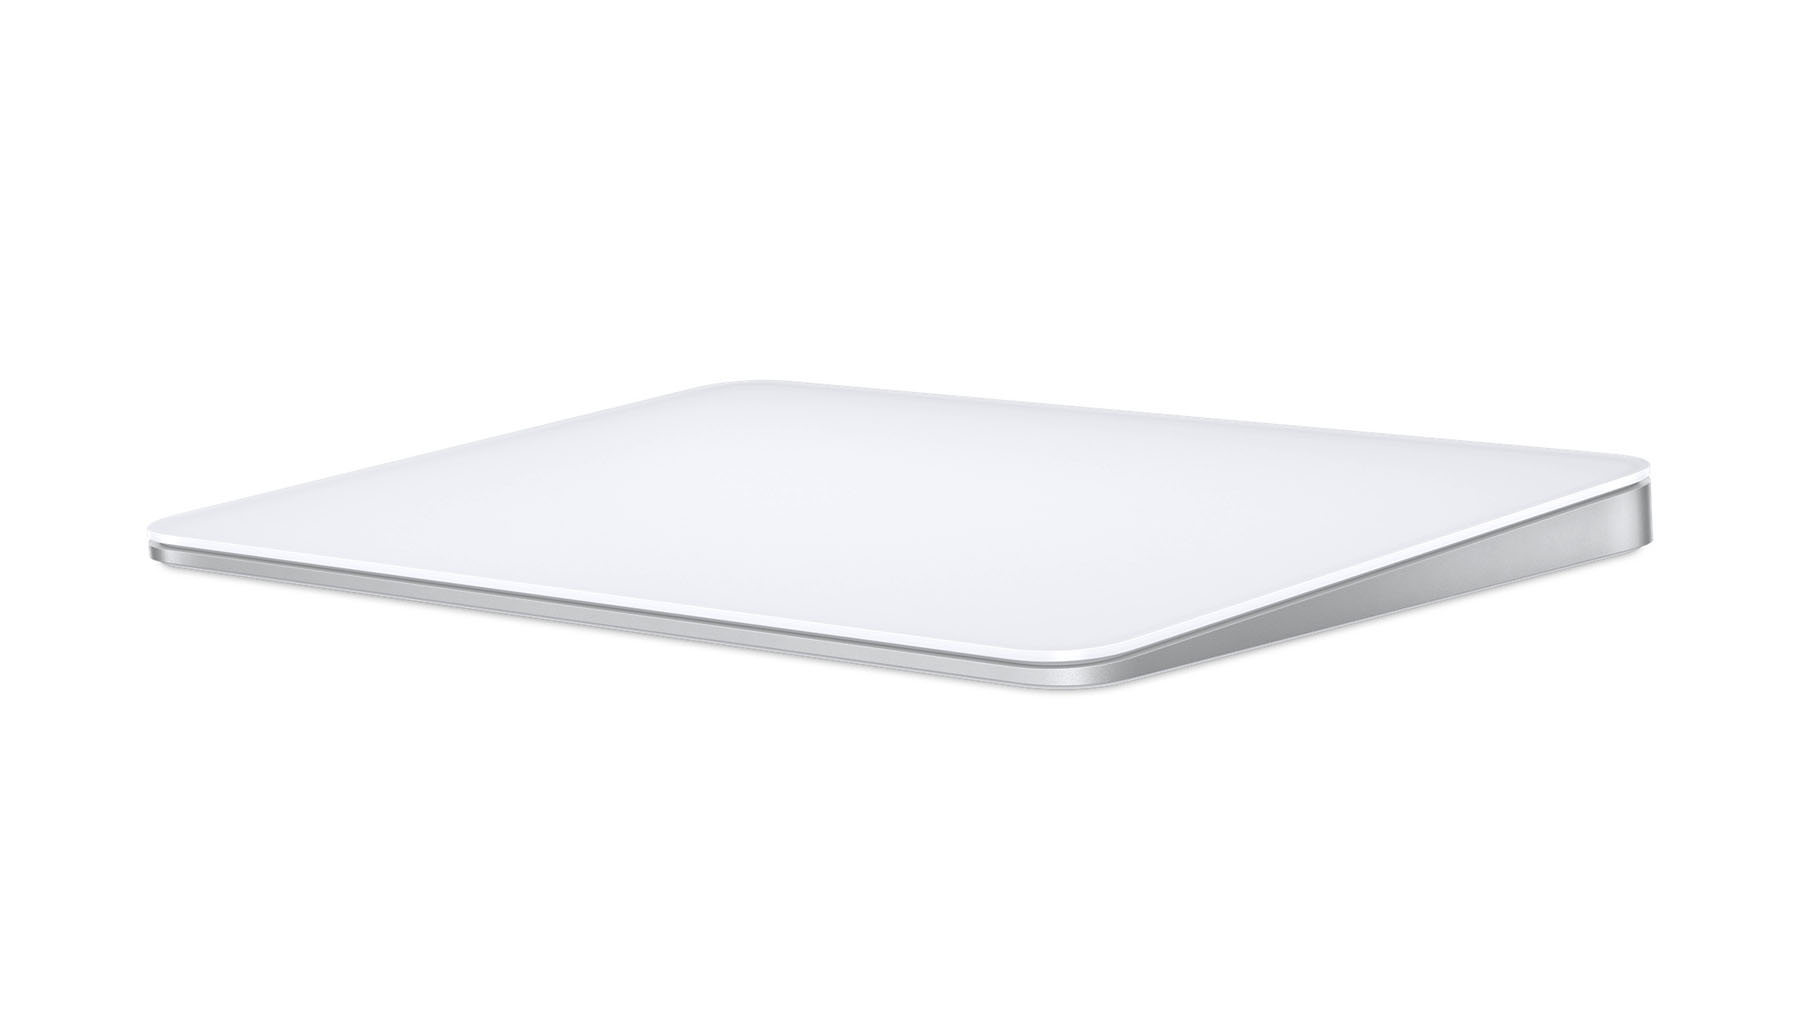 A product shot of the Apple Magic trackpad on a white background